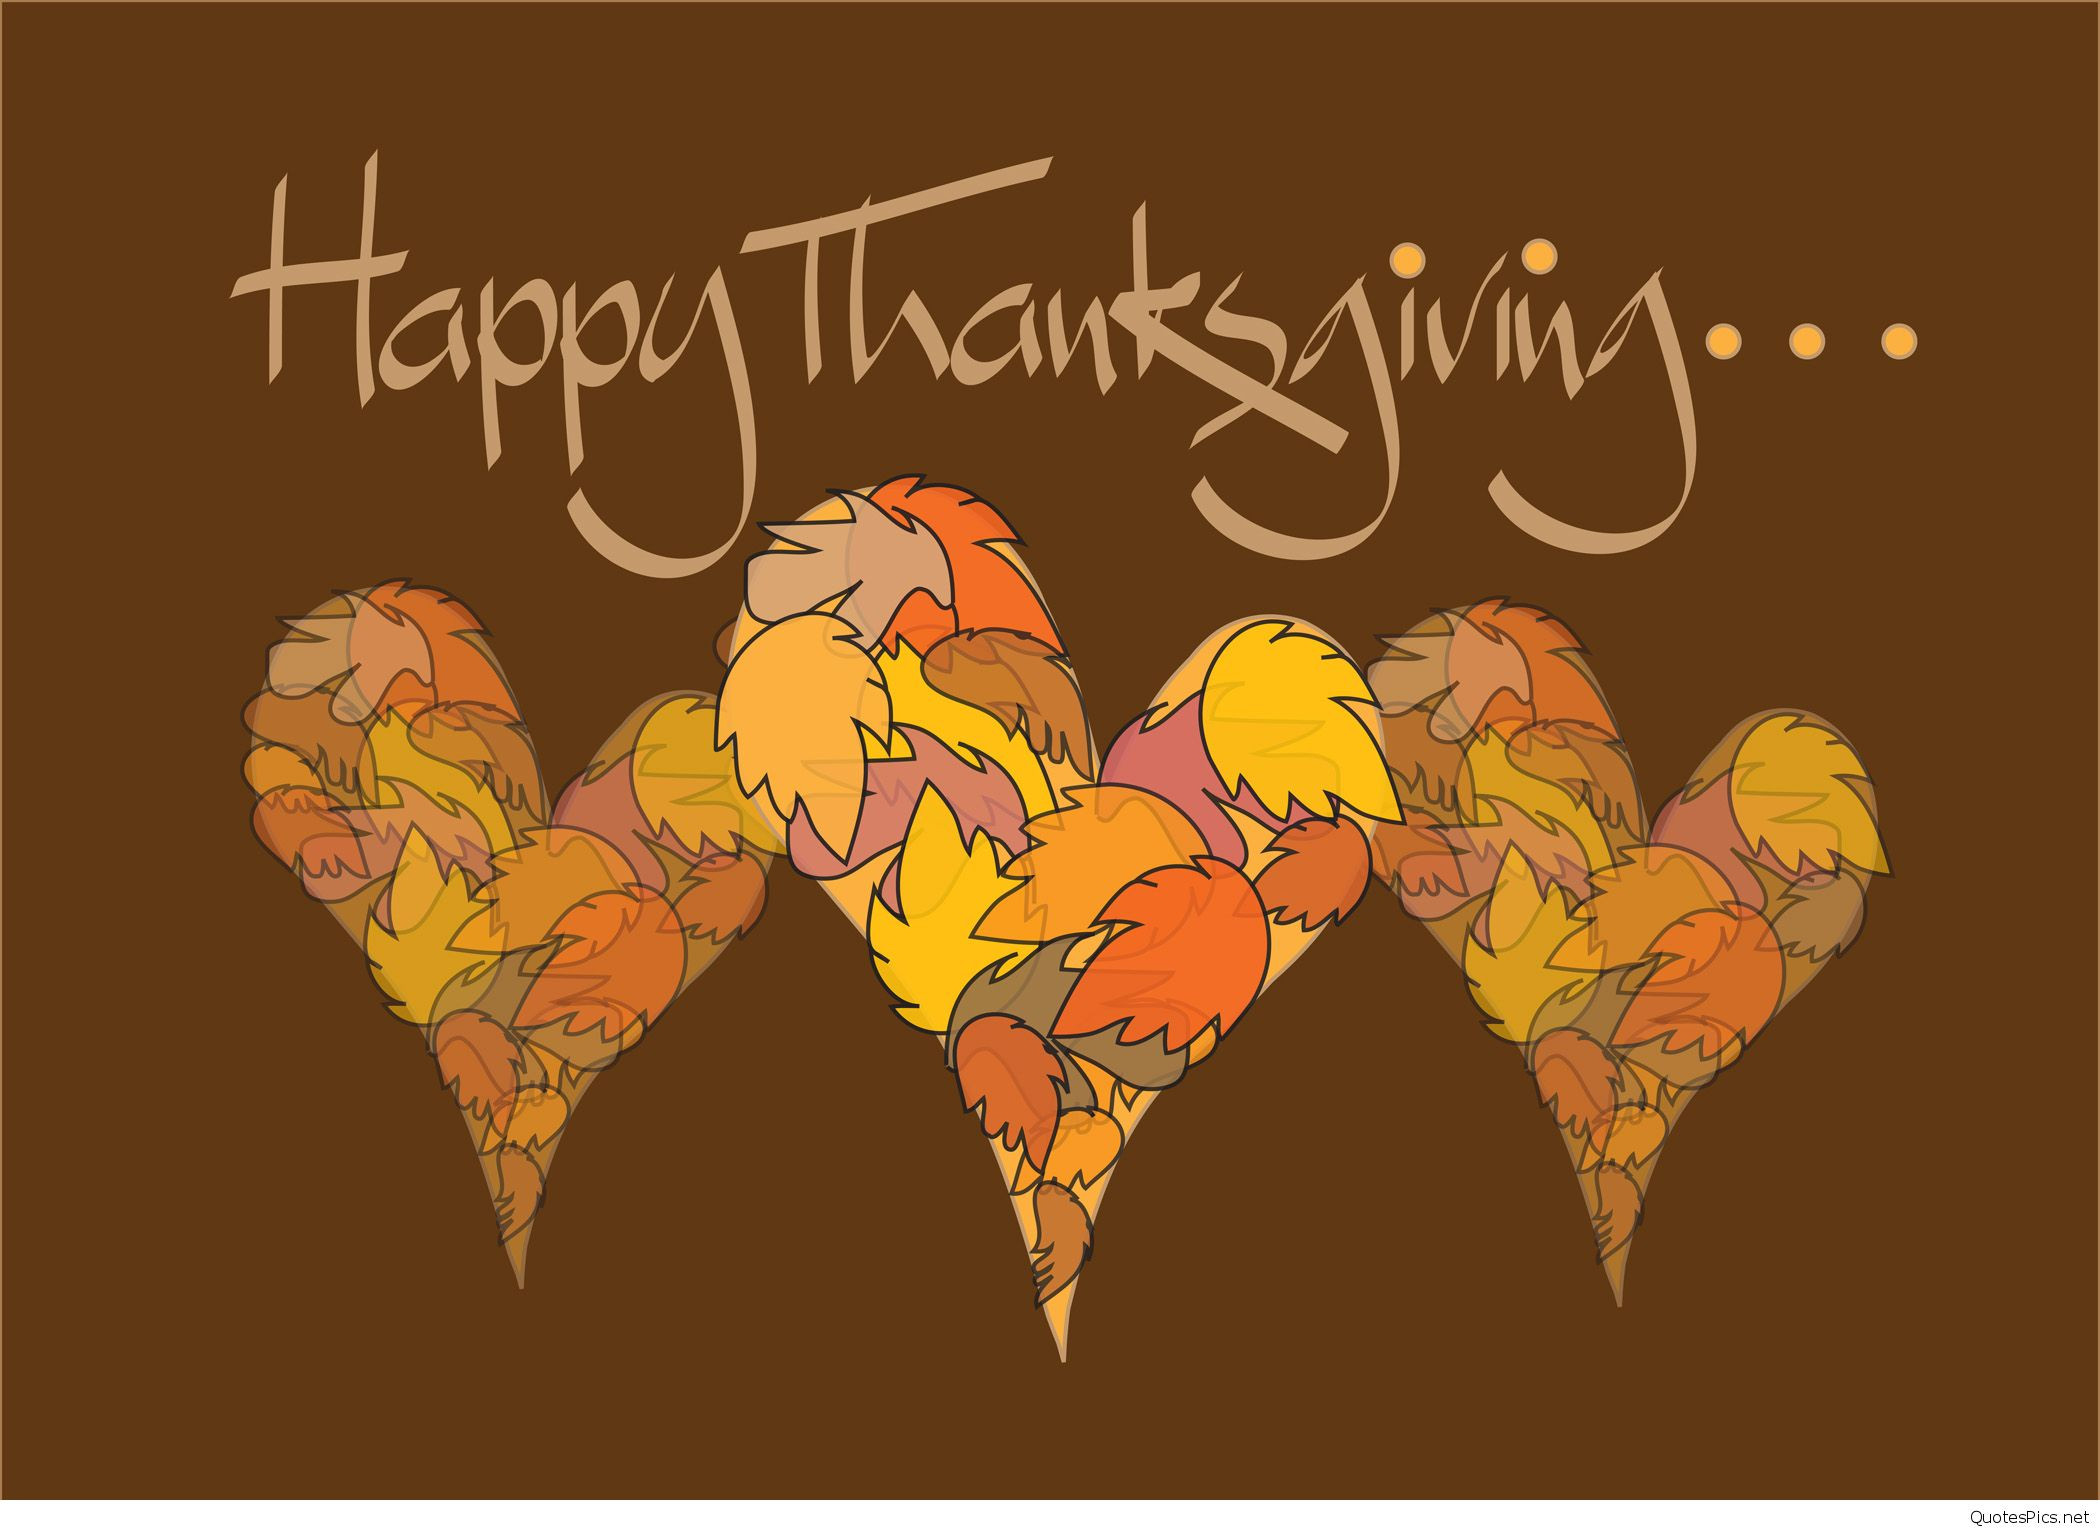 Happy Thanksgiving Turkey Pictures
 Happy thanksgiving 2016 2017 sayings wallpaper hd